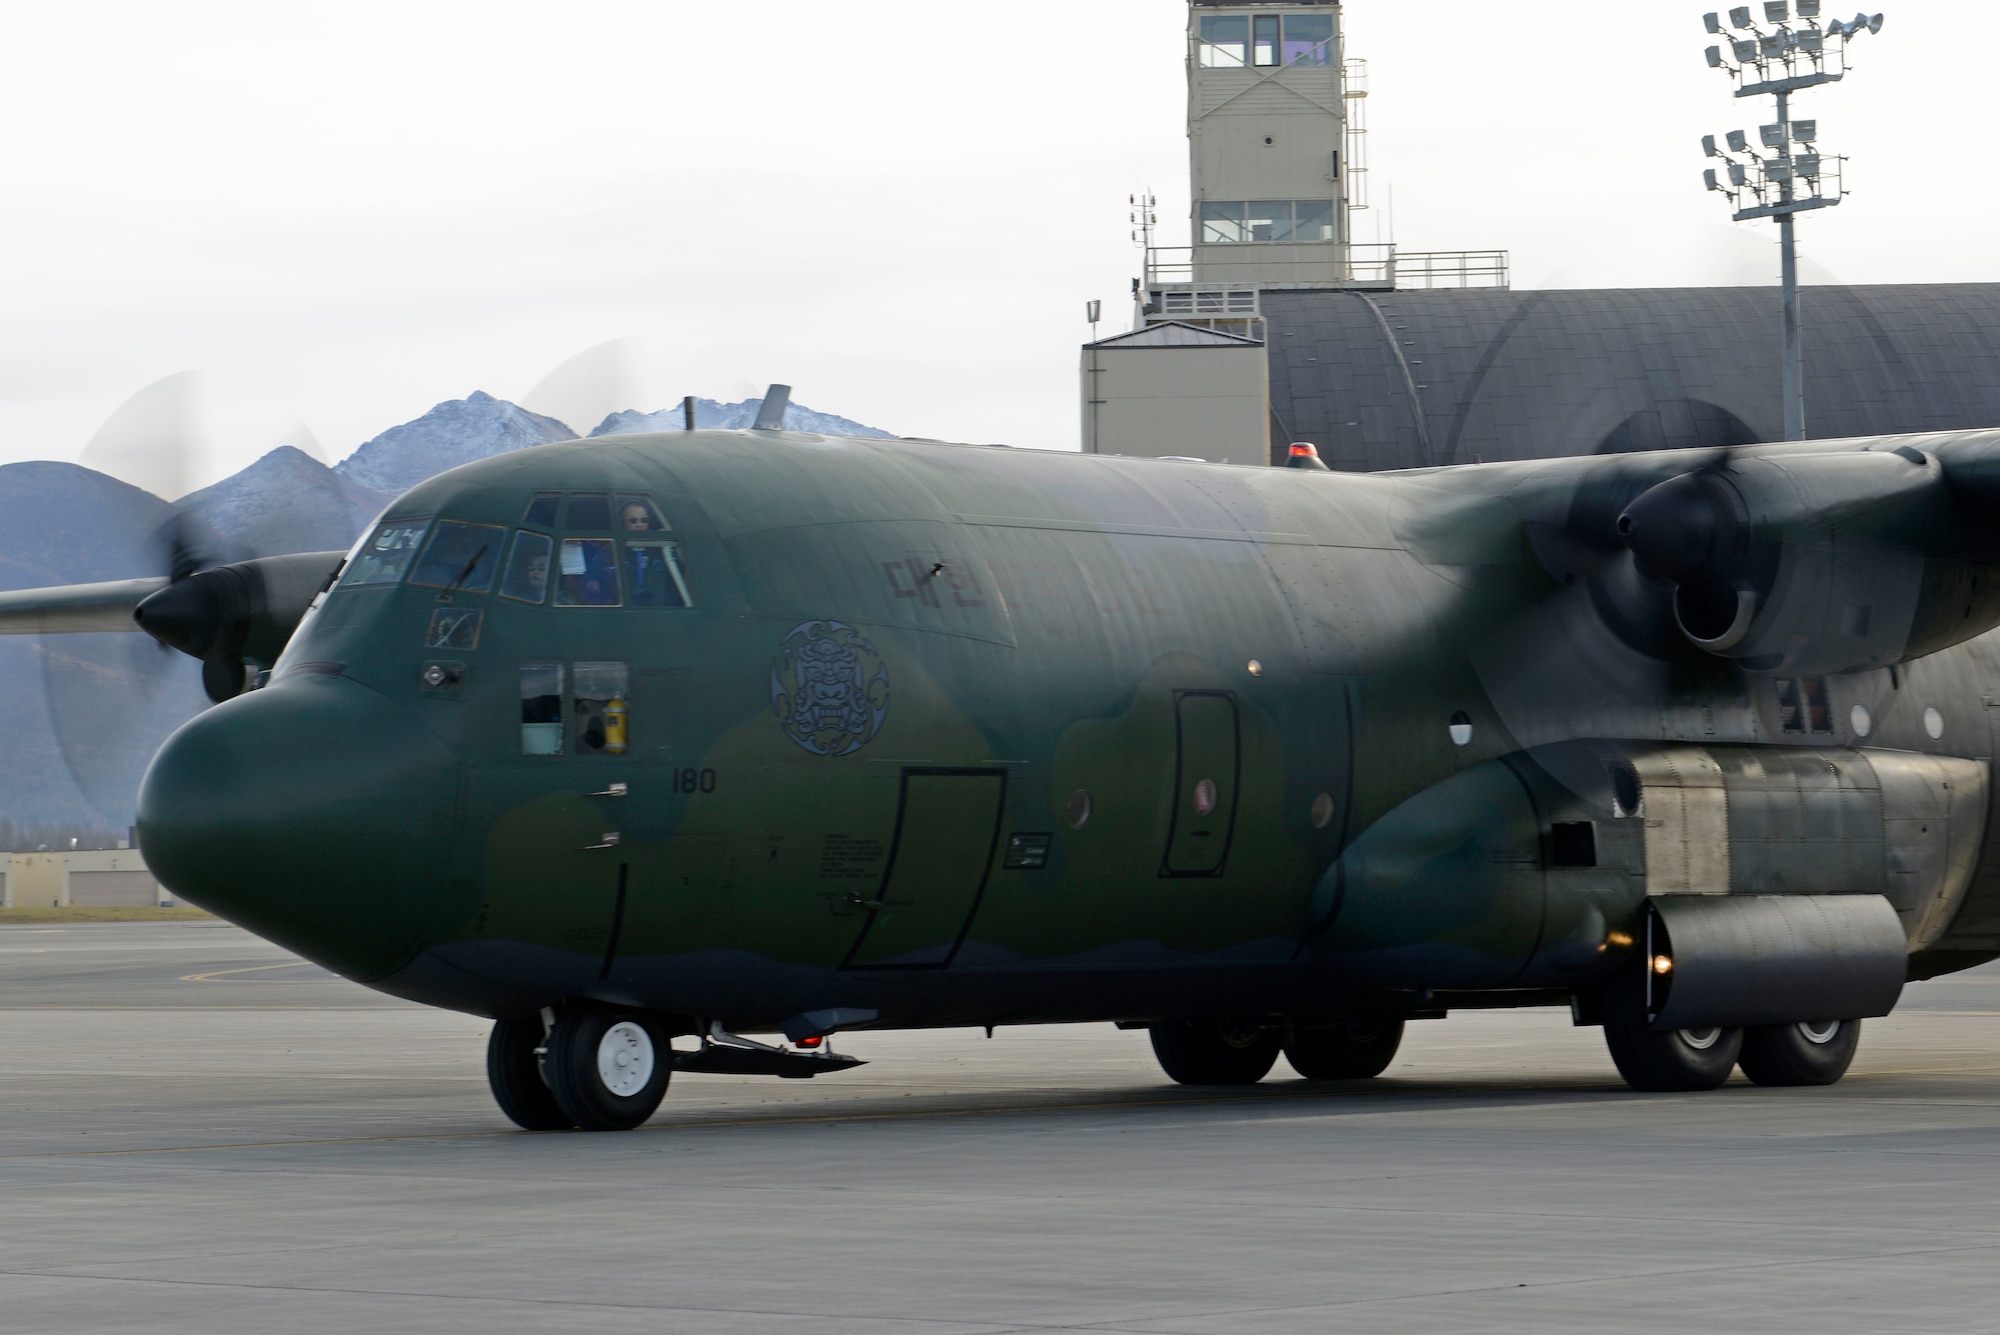 A Republic of Korea Air Force C-130 Hercules taxis on the flightline during Red Flag Alaska 17-1 at Joint Base Elmendorf-Richardson, Alaska, Oct. 19, 2016. Red-Flag Alaska 17-1 provides joint offensive counter-air, interdiction, close air support, and large force employment training in a simulated combat environment.